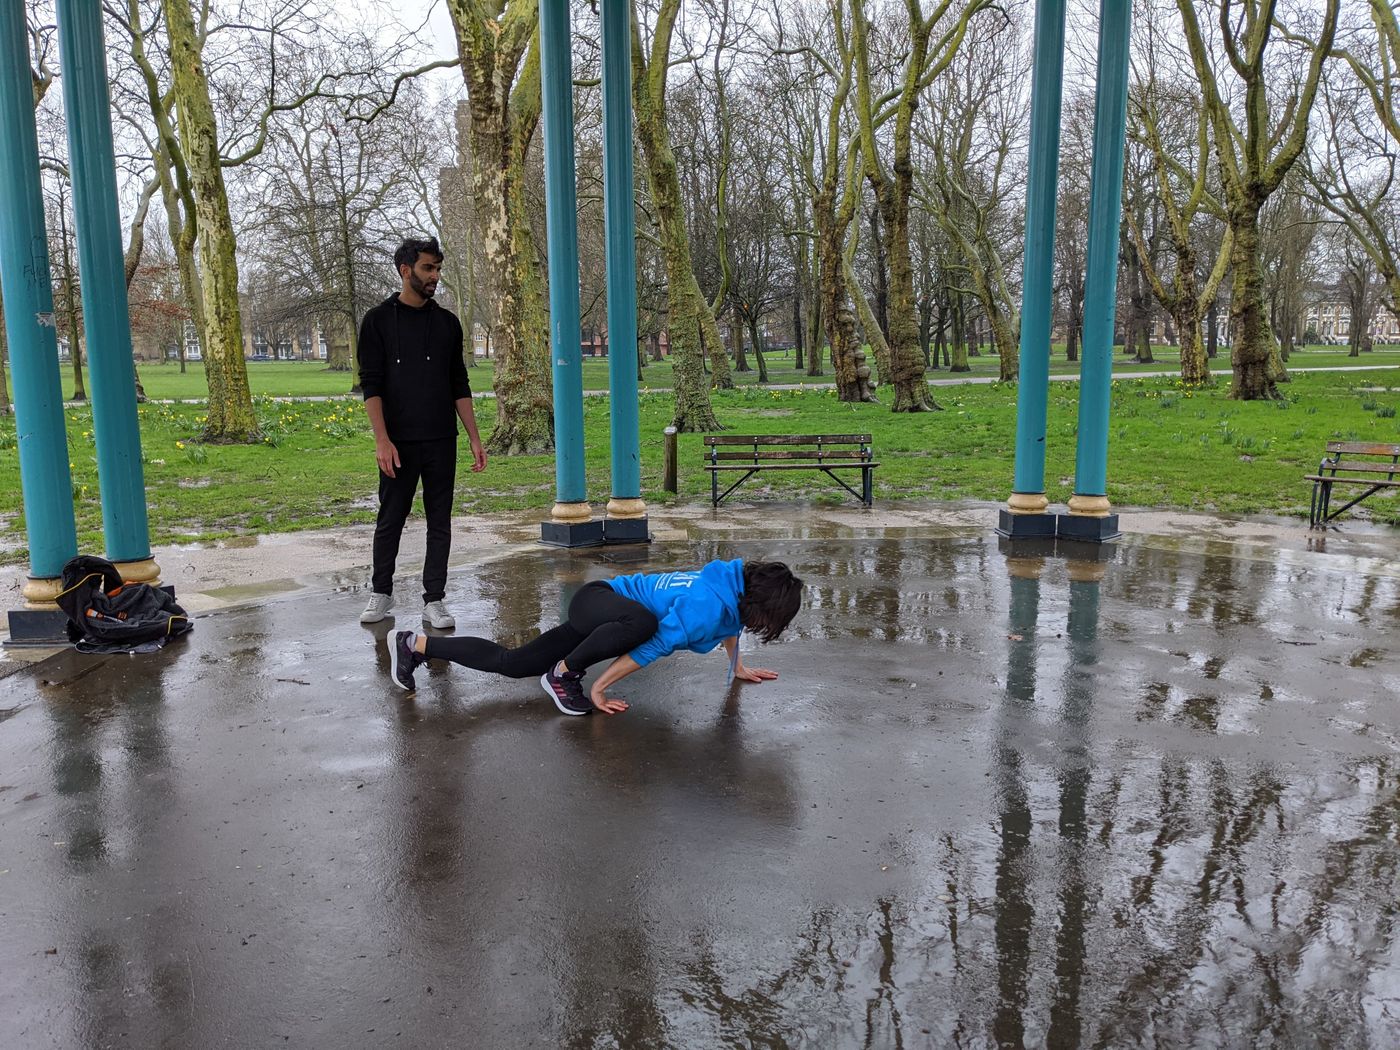 Great Parkour movement session yesterday! Look out for more classes coming soon if you want to try something a bit different to your regular training session 💪